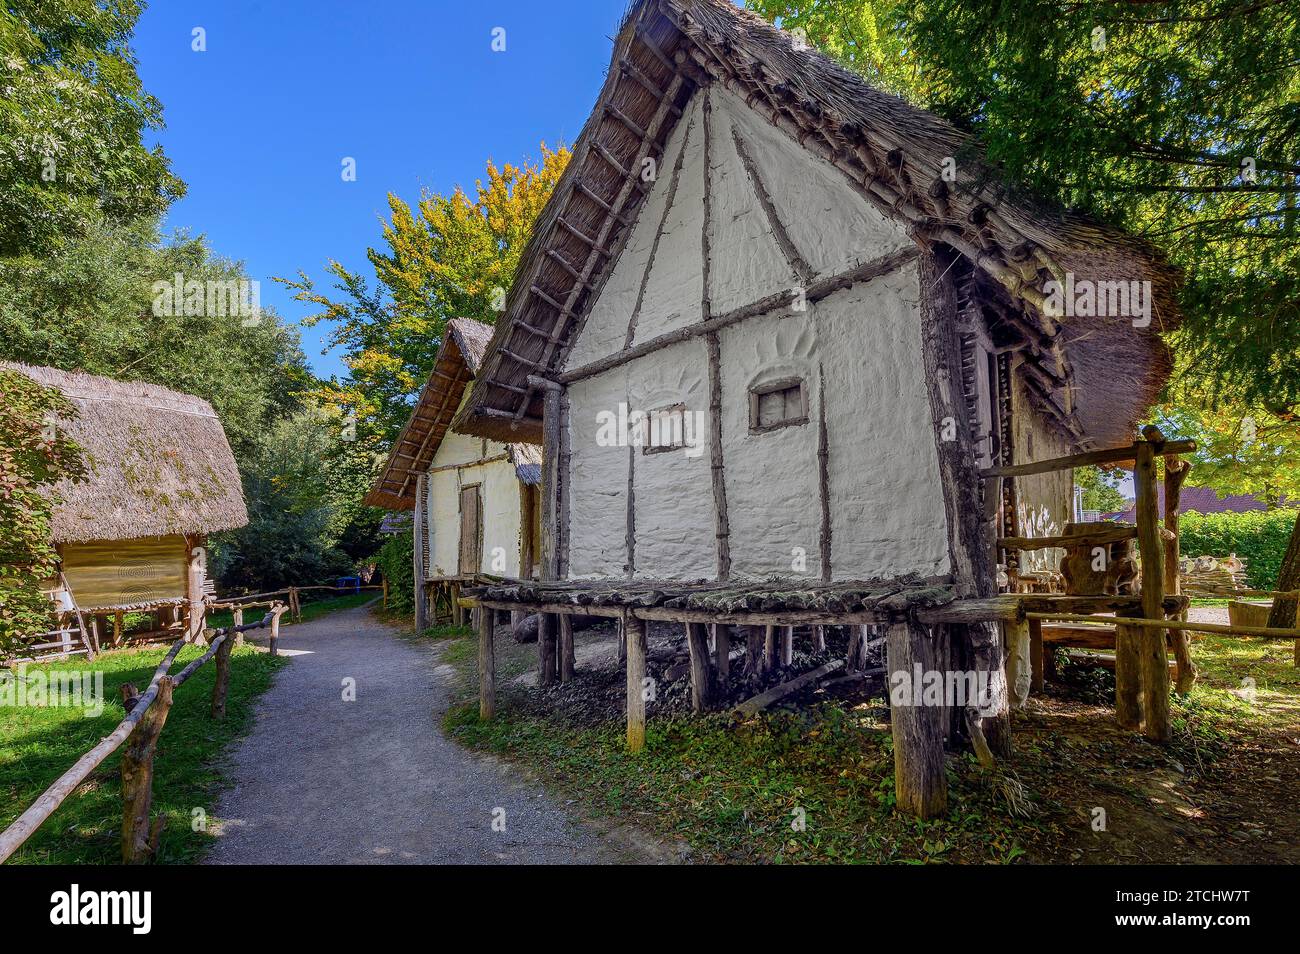 Pile dwellings on the shores of Lake Constance, a tourist attraction in the region and the oldest open-air archaeological museum in Germany Stock Photo